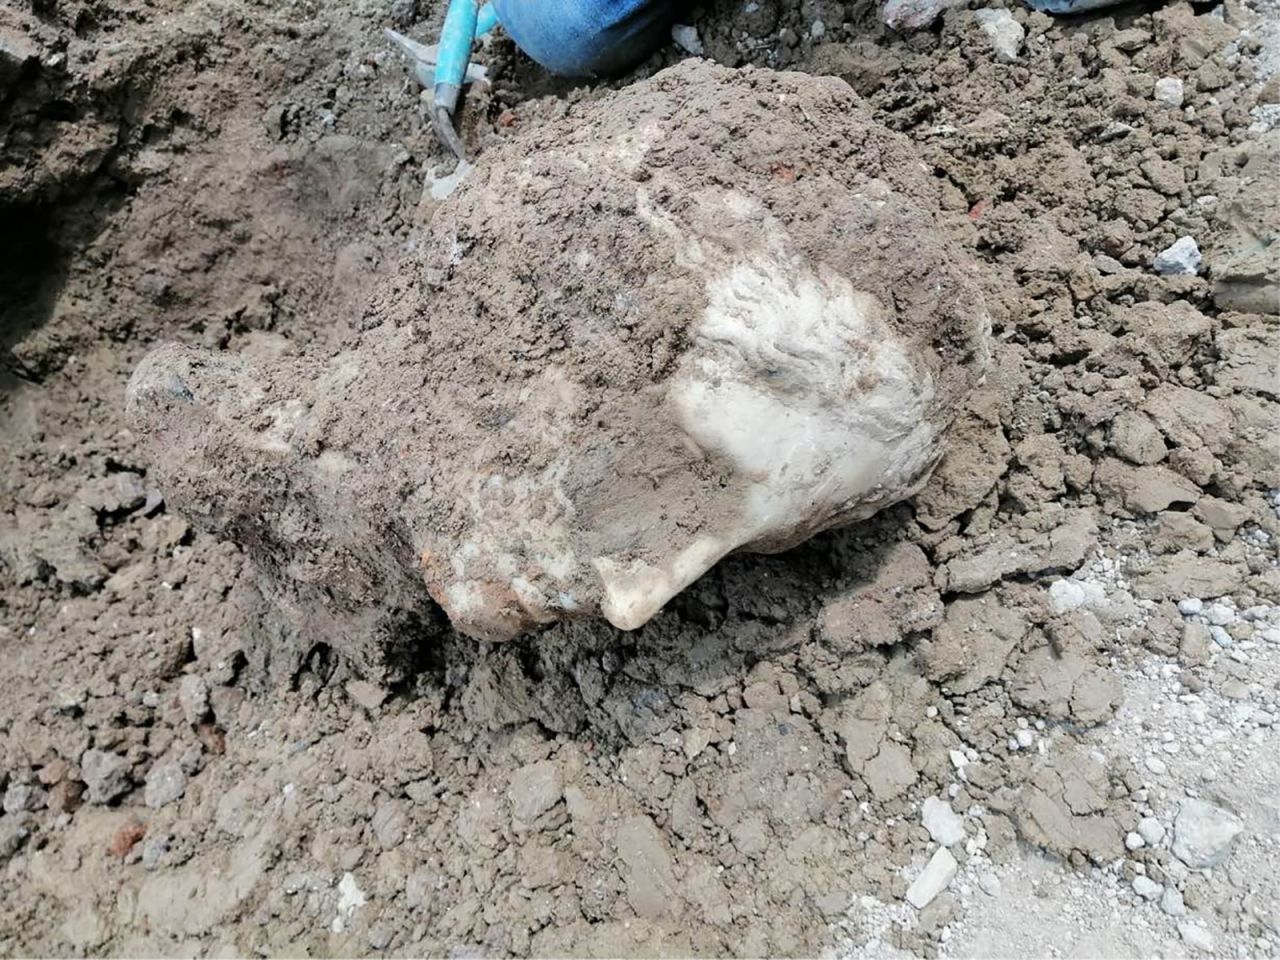 The head was found lying down and covered in earth.